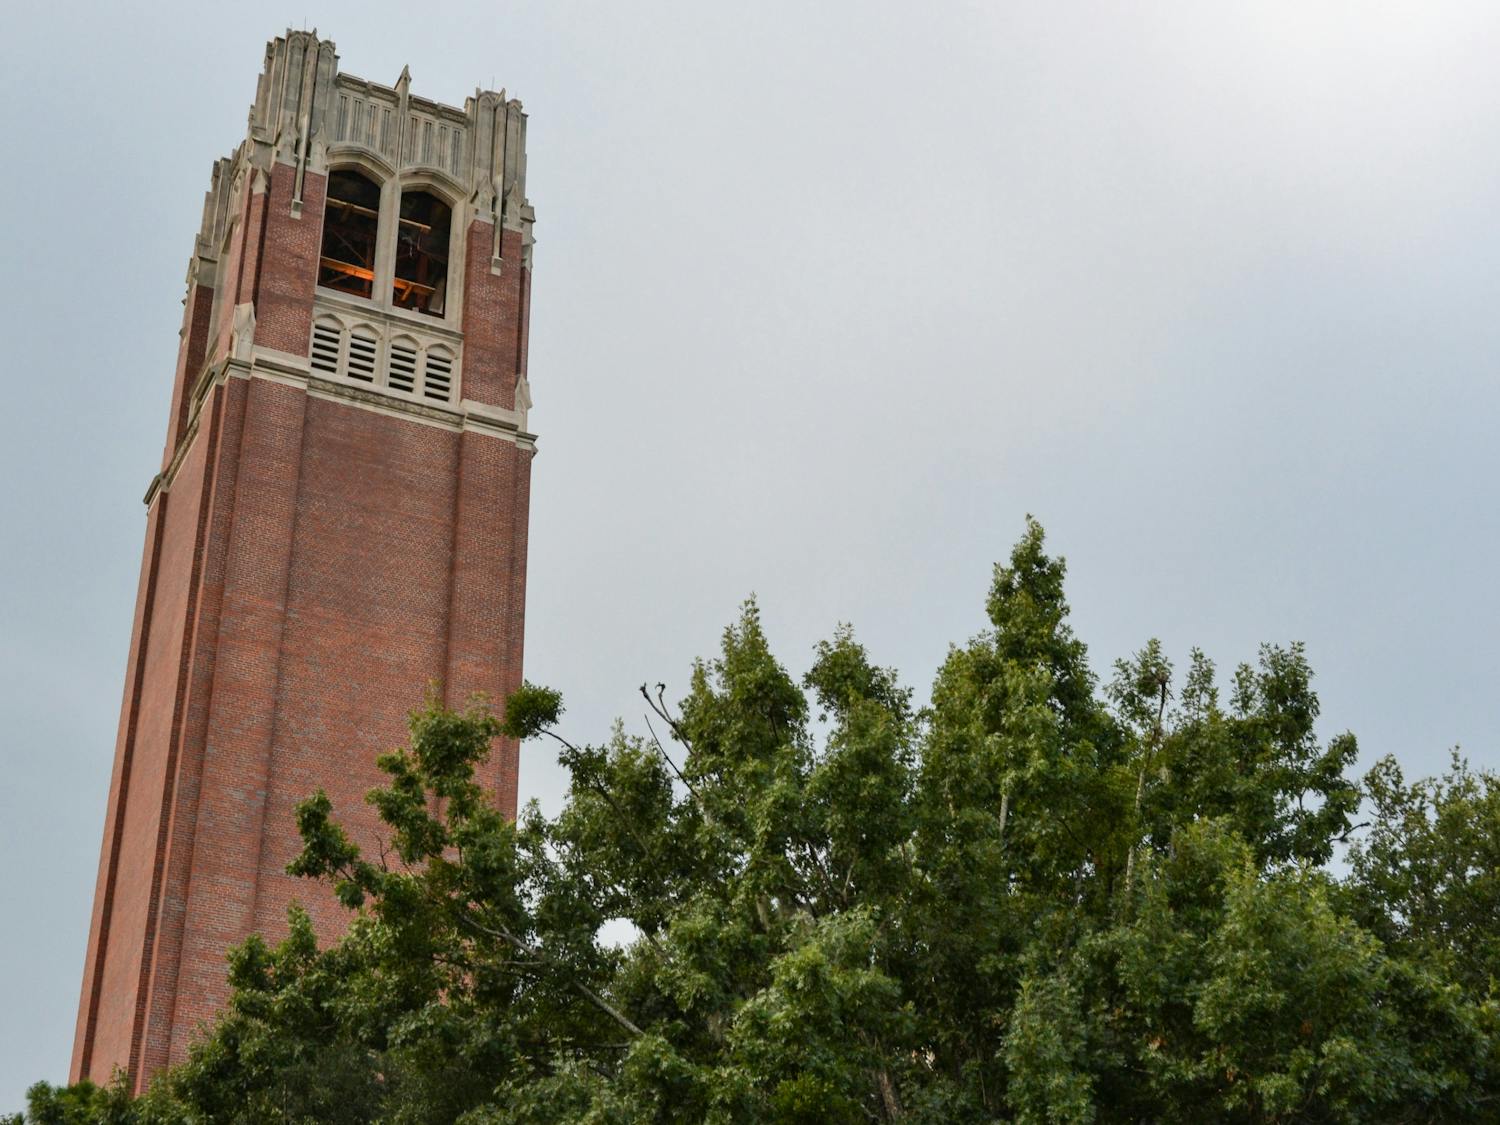 The University of Florida's Century tower, as viewed from Newell Drive on Thursday, July 22, 2021. The tower commemorates UF students who fought and died in World War I and World War II -- the tower also commemorates the 100th anniversary of UF's founding in 1853. 